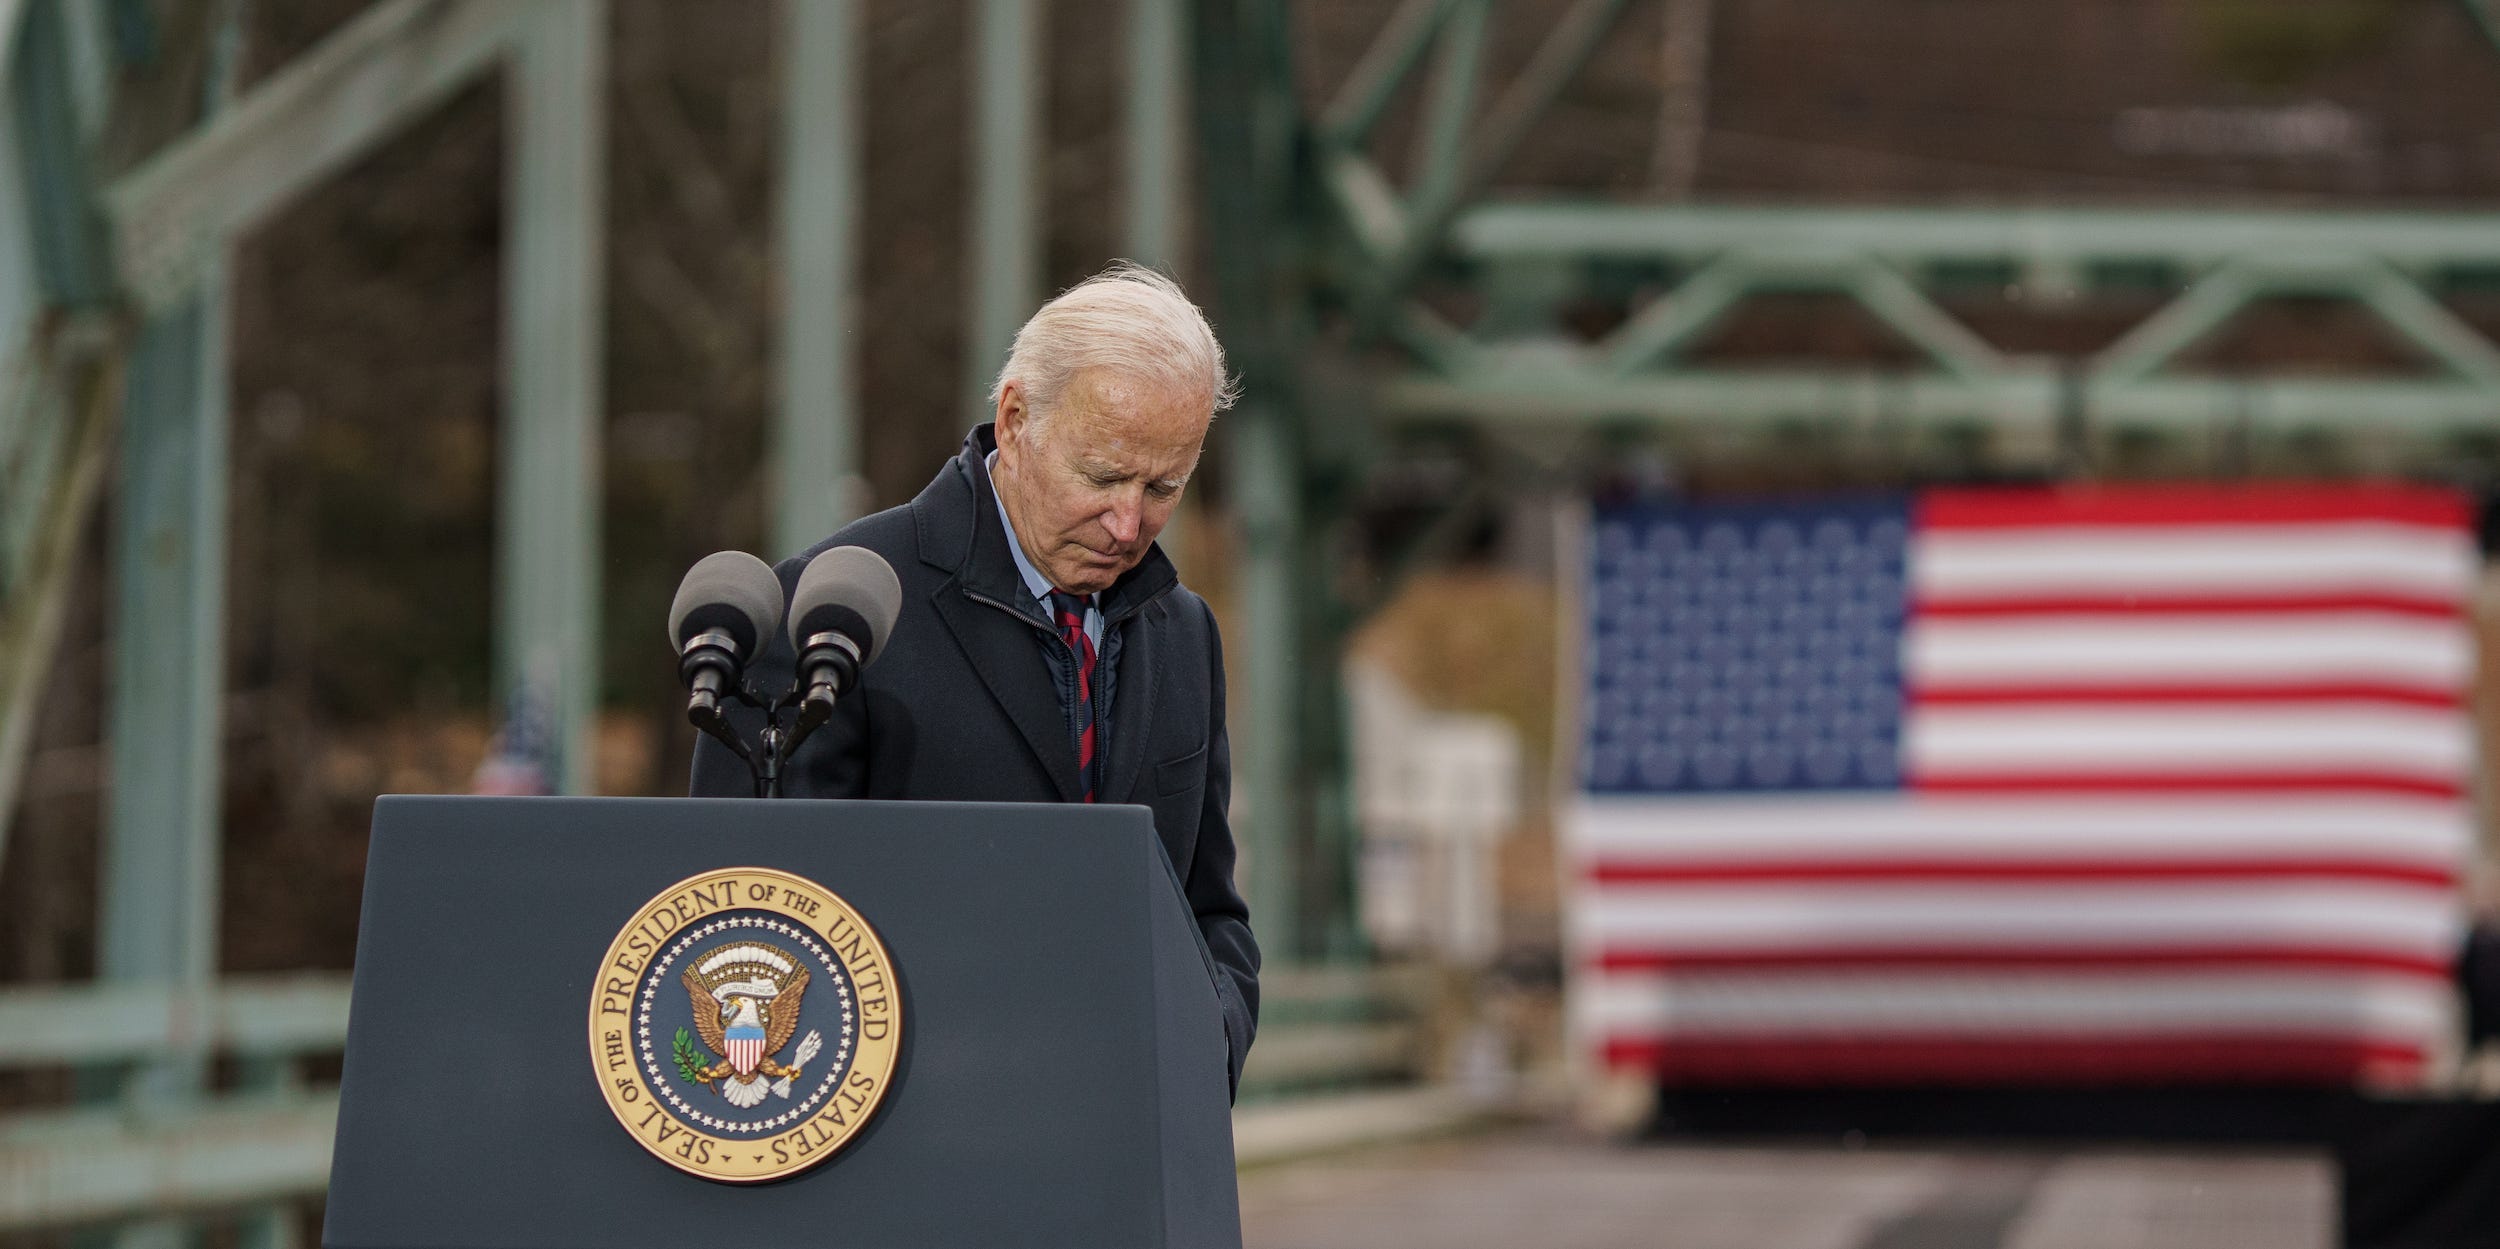 President Joe Biden delivers a speech on infrastructure while visiting the NH 175 bridge spanning the Pemigewasset River on November 16, 2021 in Woodstock, New Hampshire